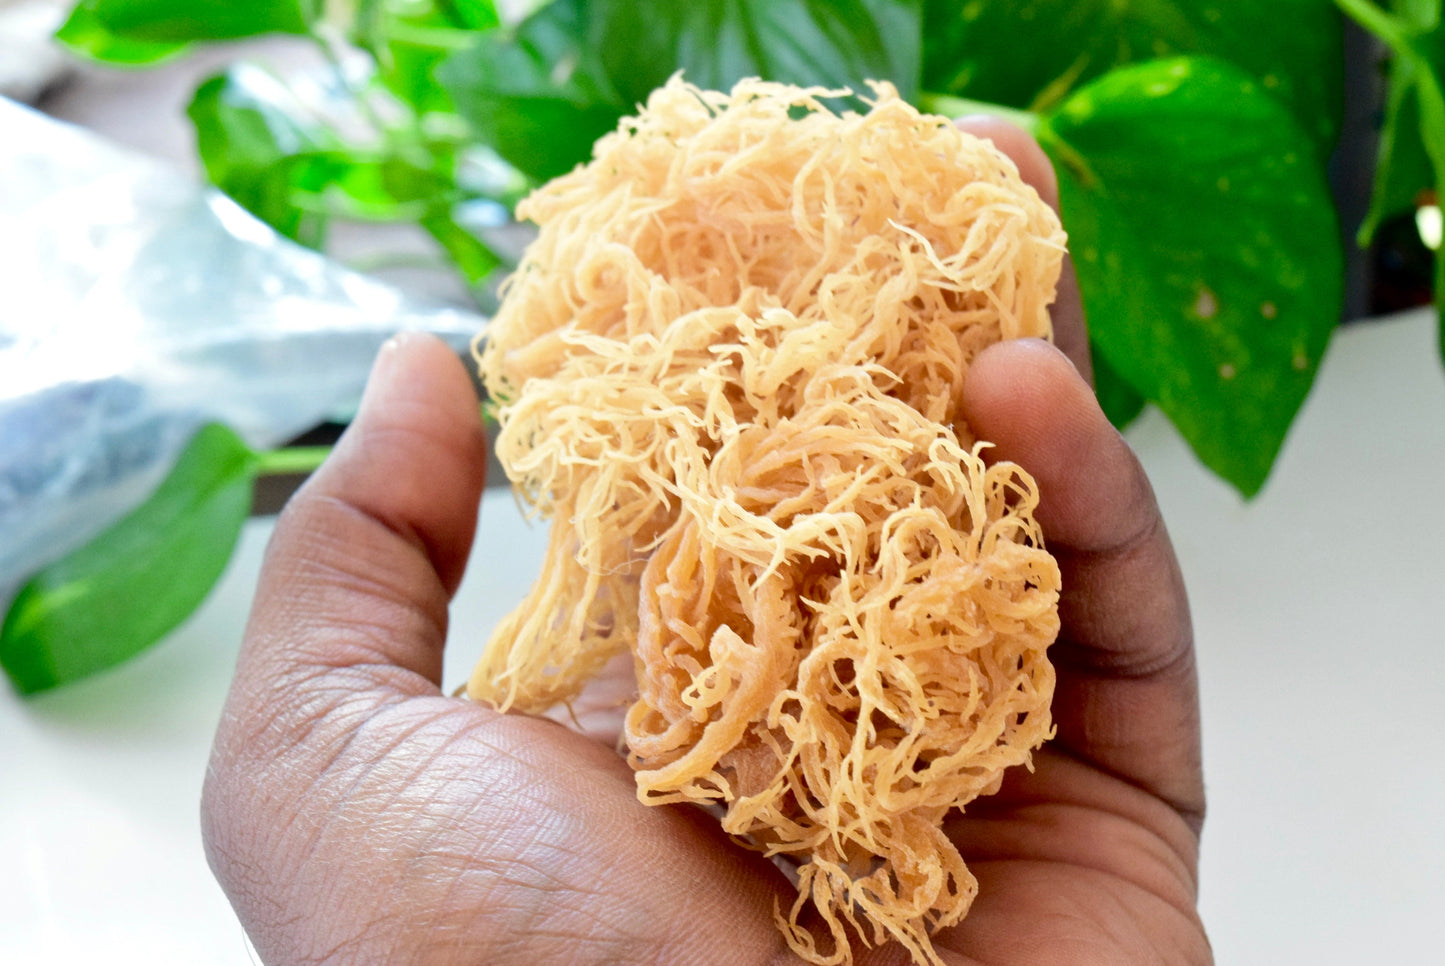 Buy 2 & Get 1 Free Sale!! St. Lucian Sea Moss Special!!! Fast Free Delivery (U.S. Shipped)!! - DukeCityHerbs